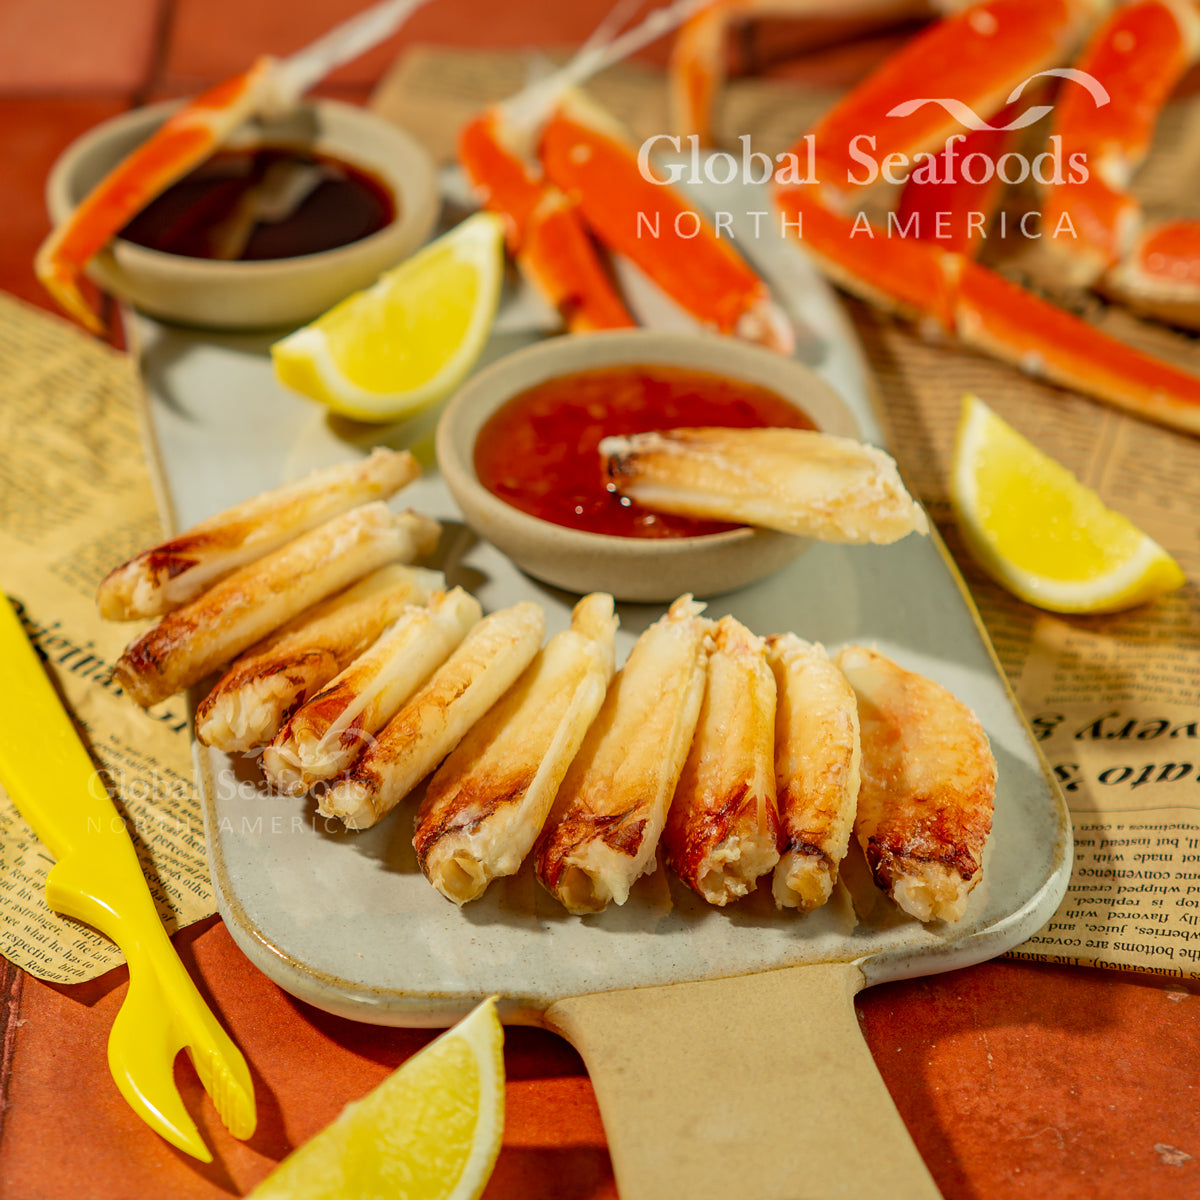 Close-up of Dungeness Crab Merus Meat, highlighting its tender texture and fresh quality in a 1 lb package